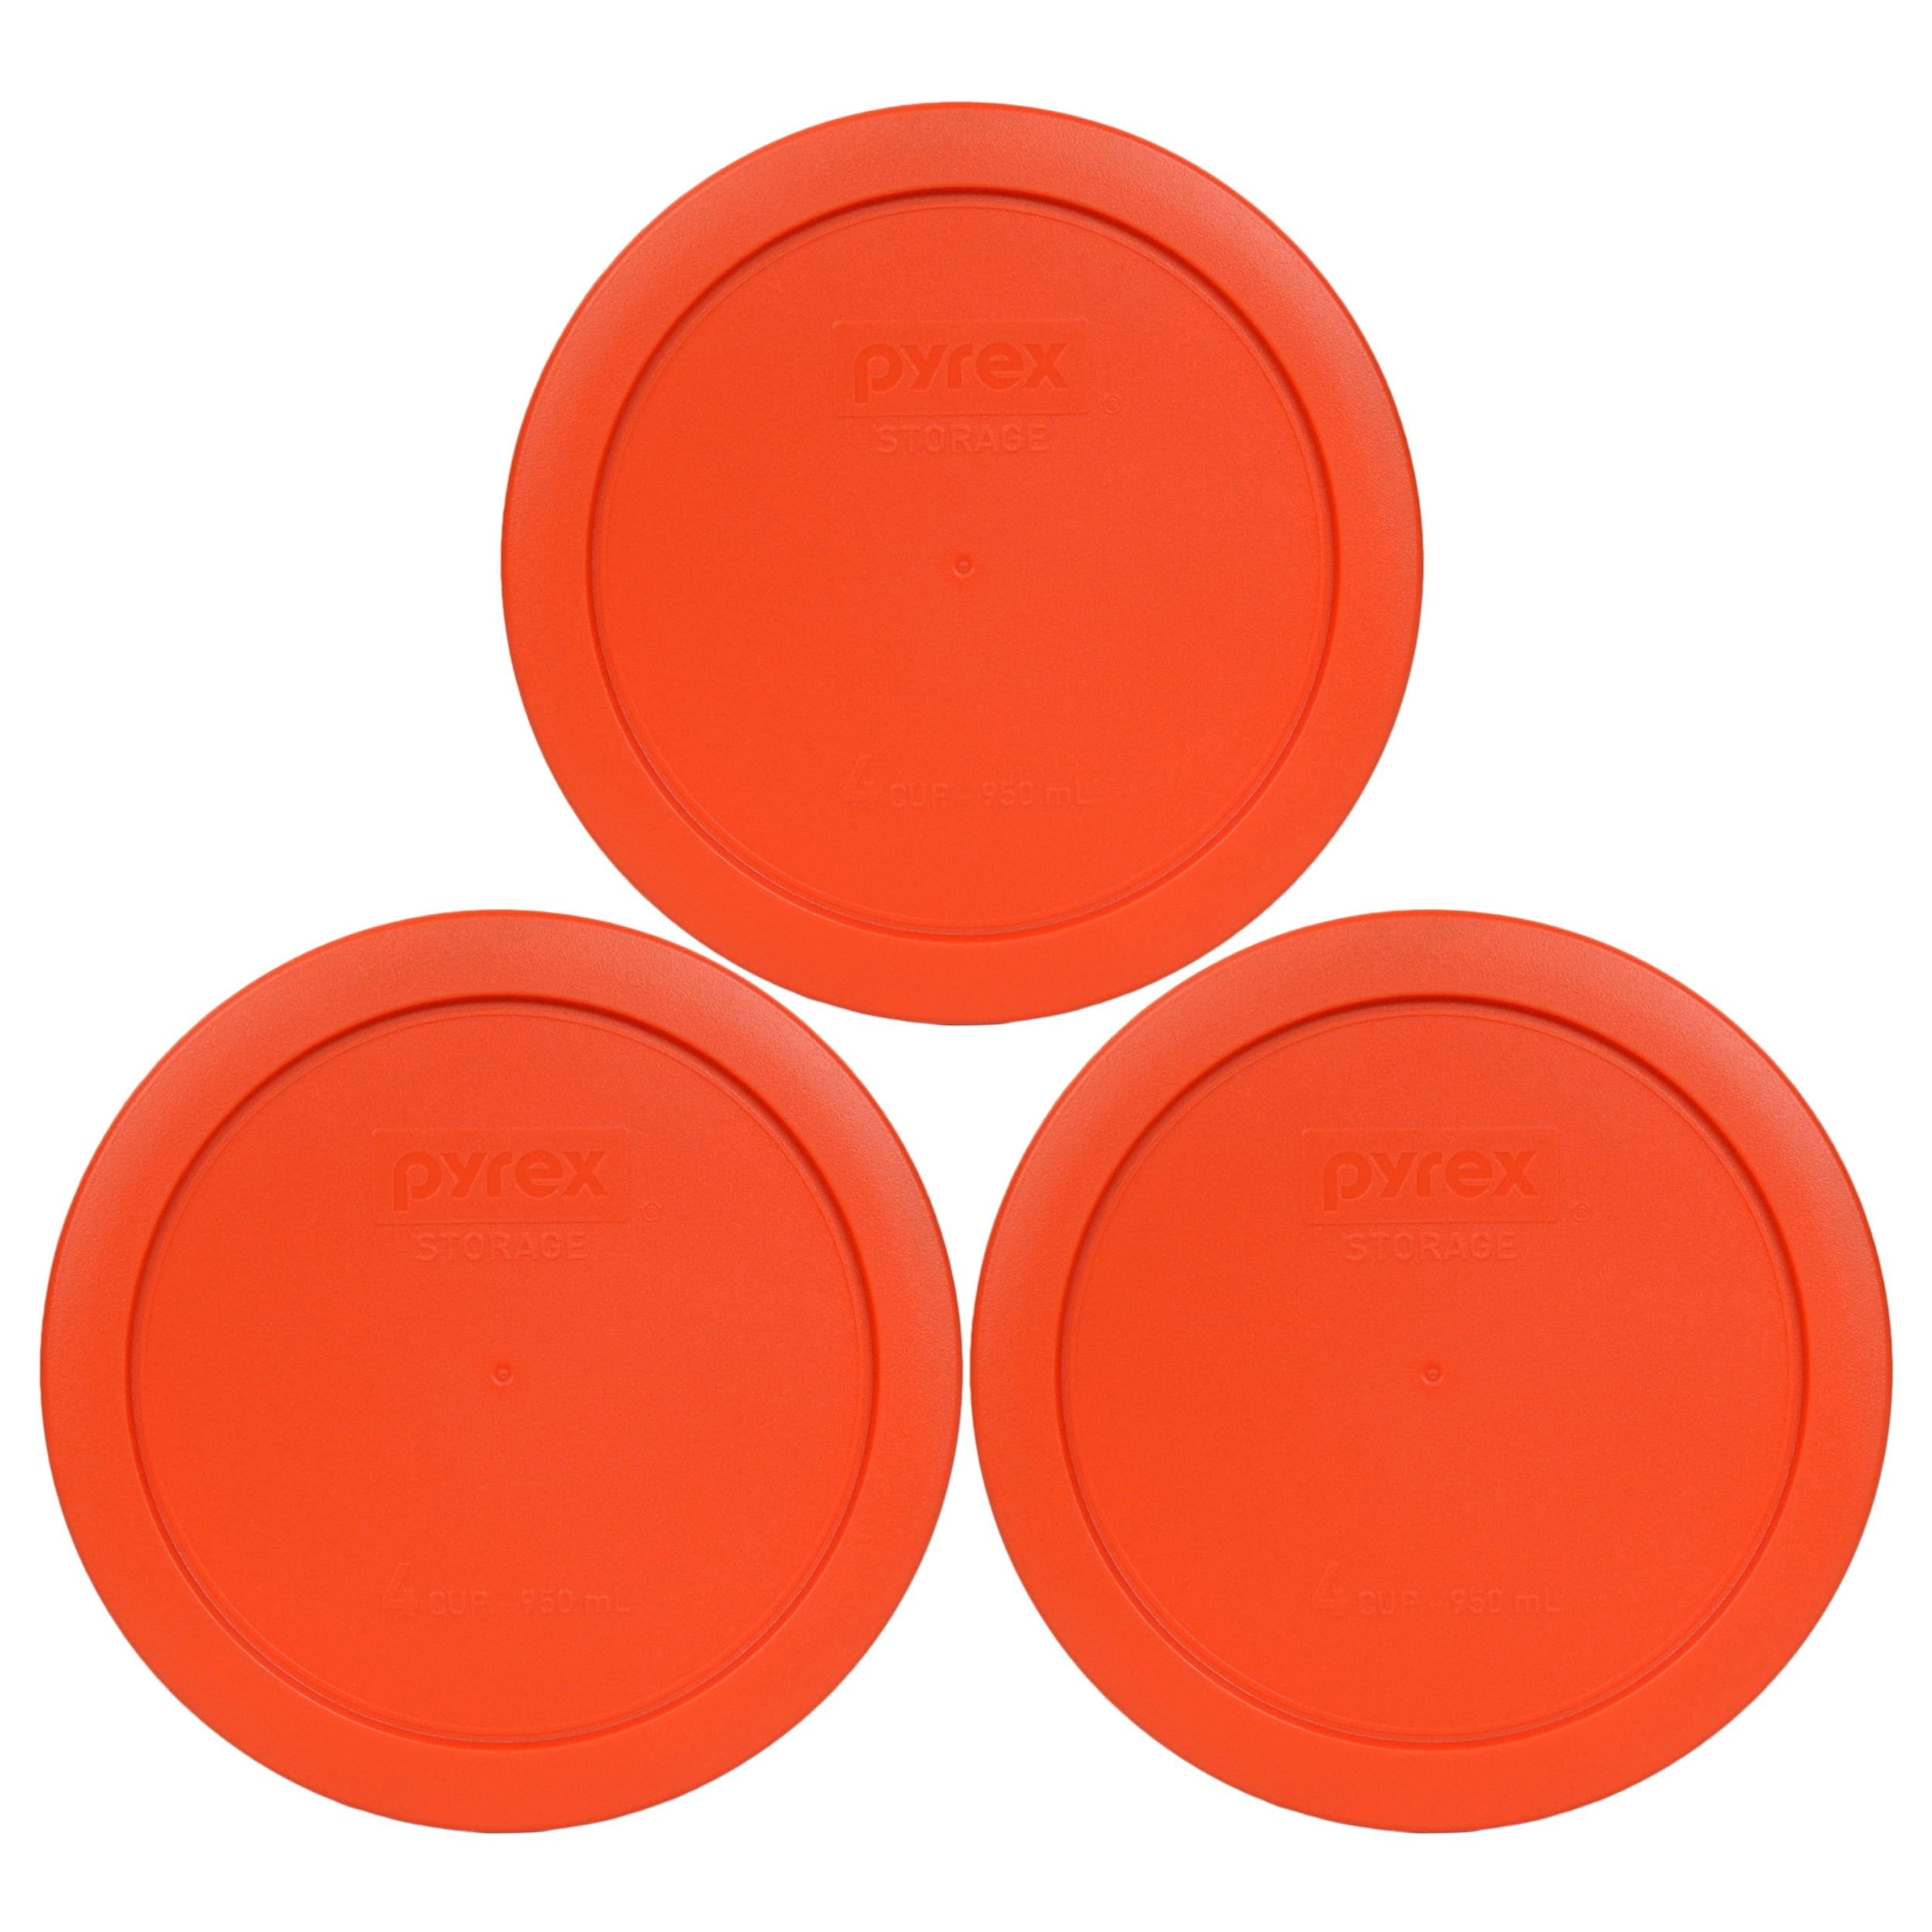 PYREX 7201-pc 4 Cup Round Pumpkin Orange Lid Cover 3pk for Glass Bowl for sale online 